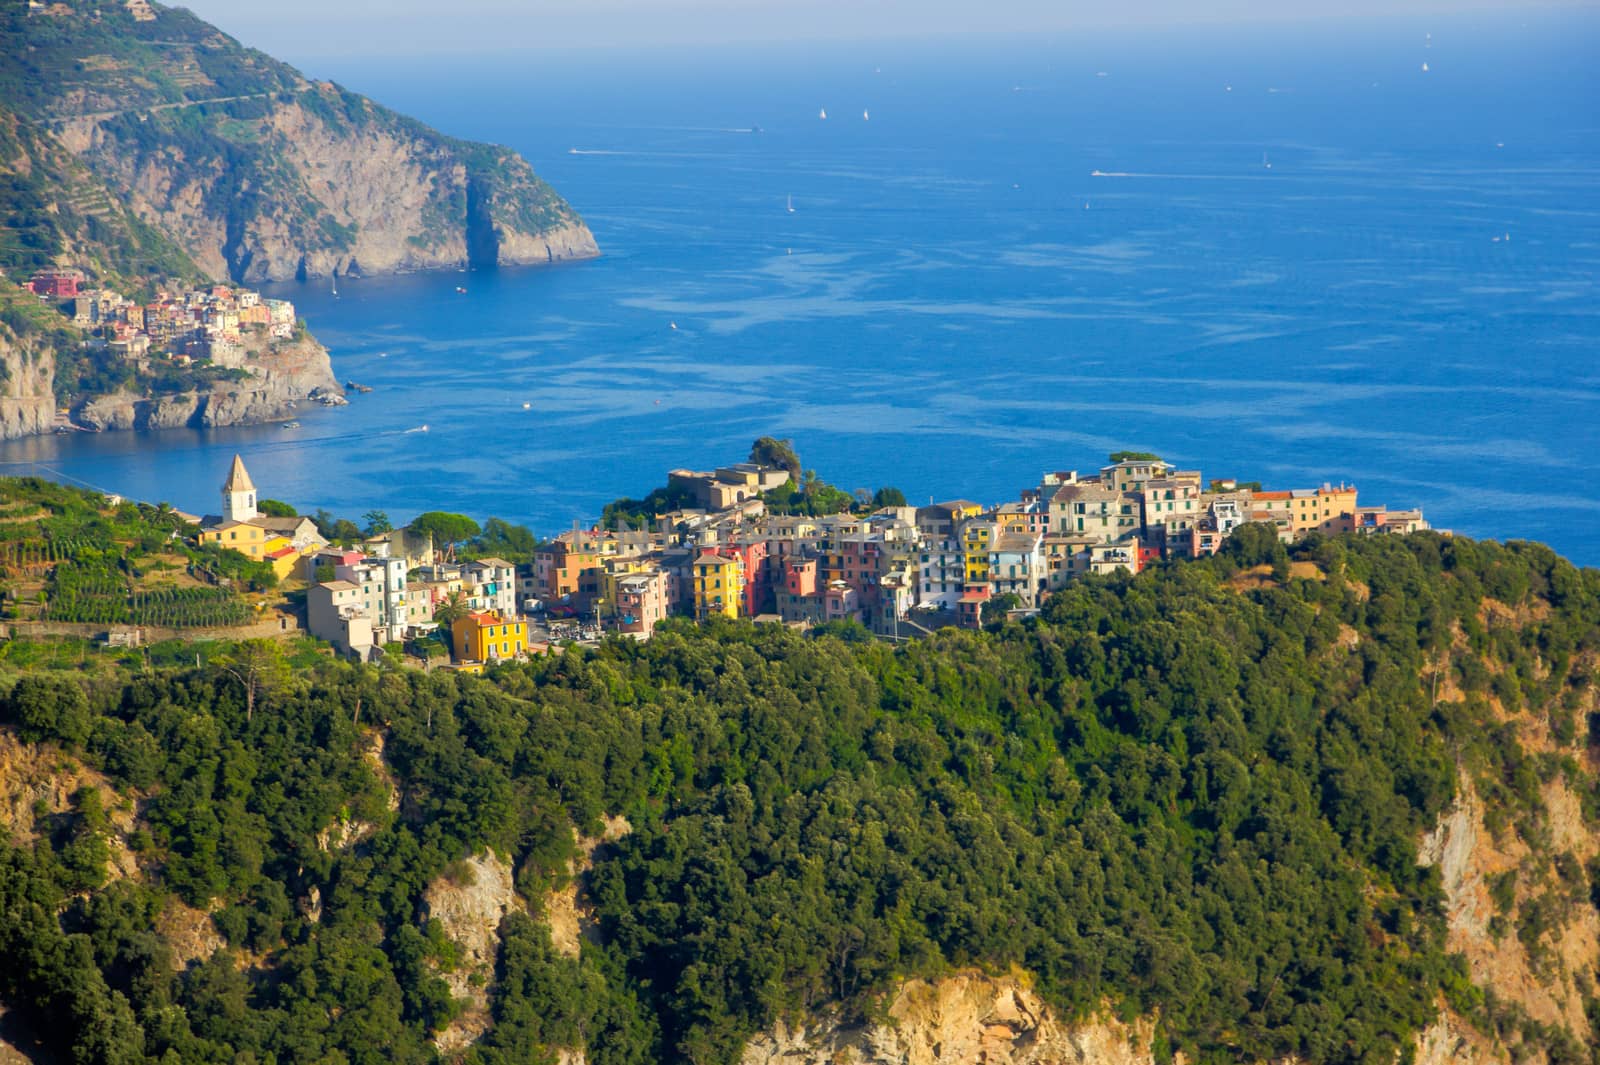 Corniglia from a distance by Stootsy